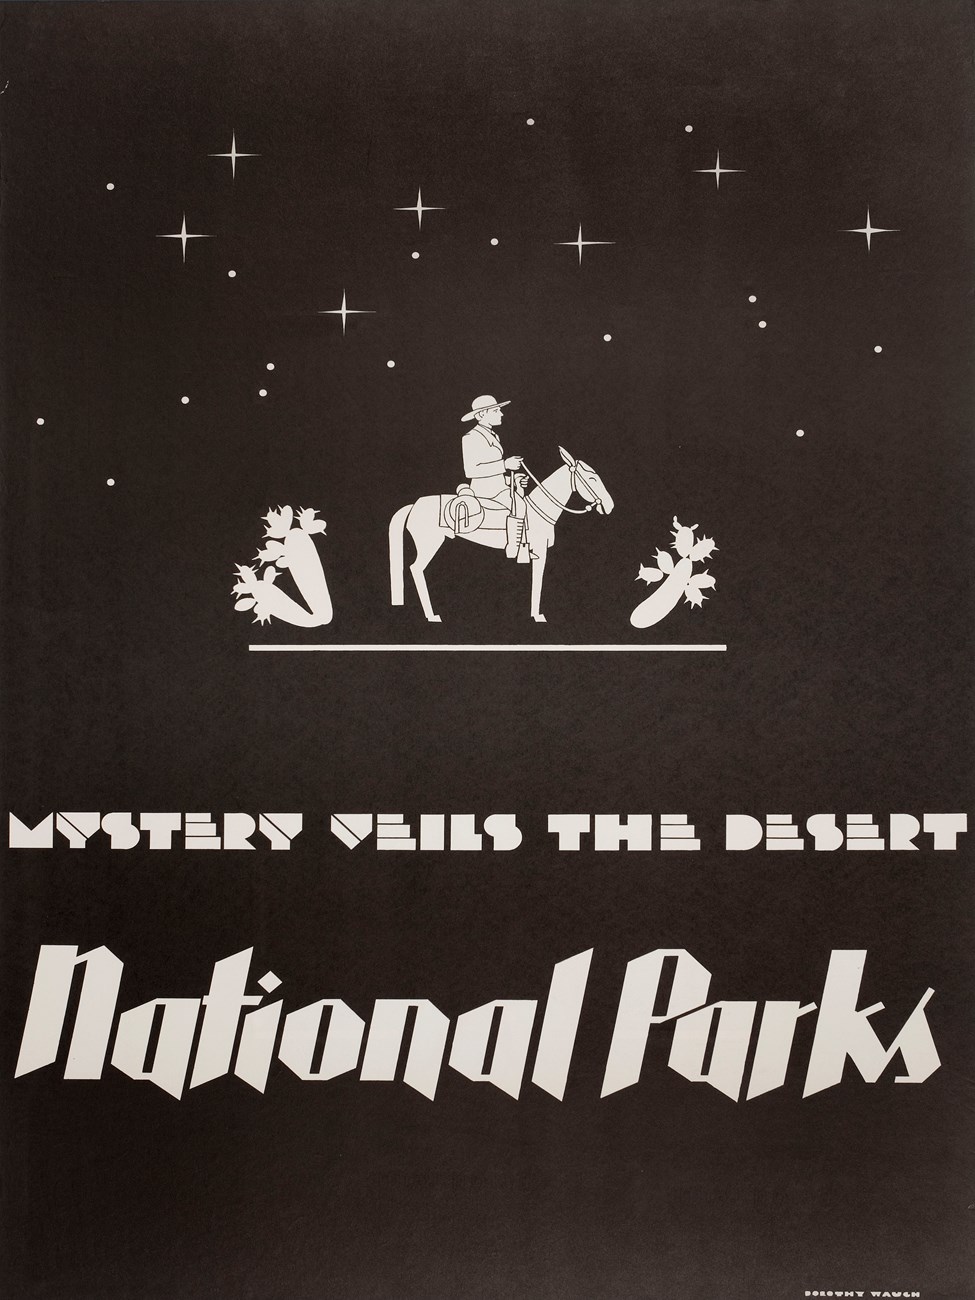 Solid black poster with white figure on horseback between two cacti under white stars. "Myster Veils the Desert National Parks" written in white on the lower third of the poster.